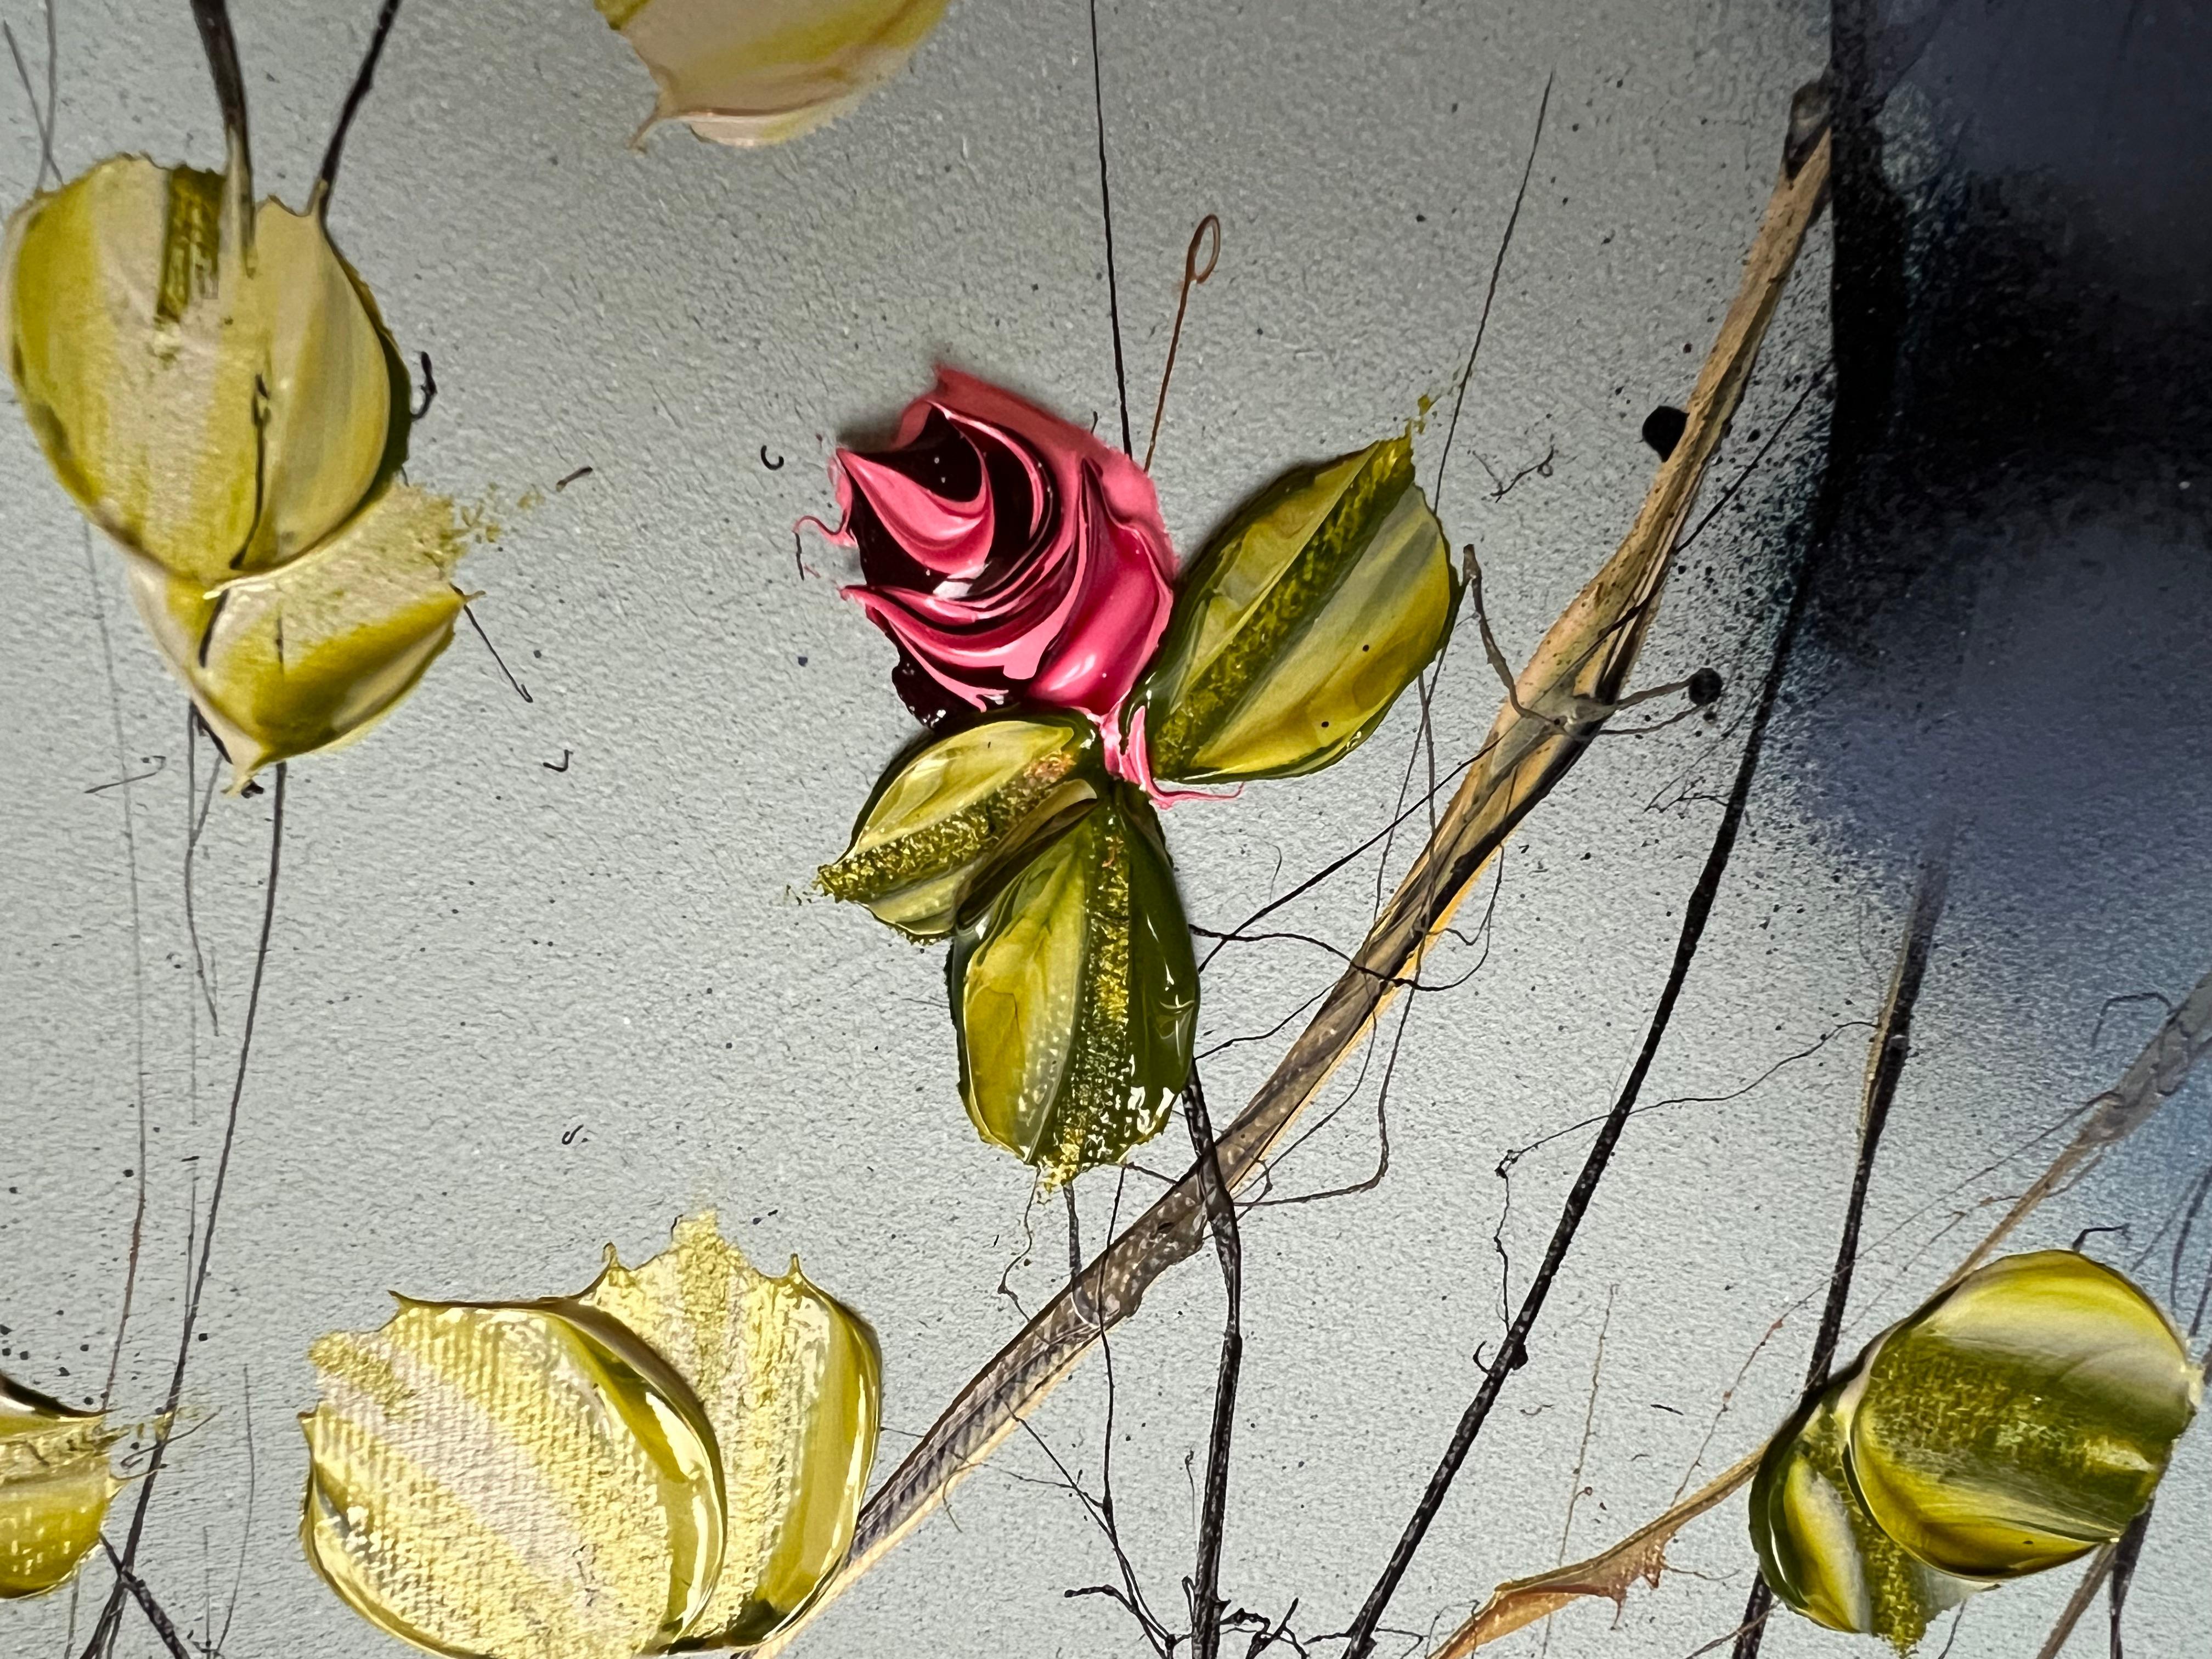 Abstrakt textured floral painting with roses 